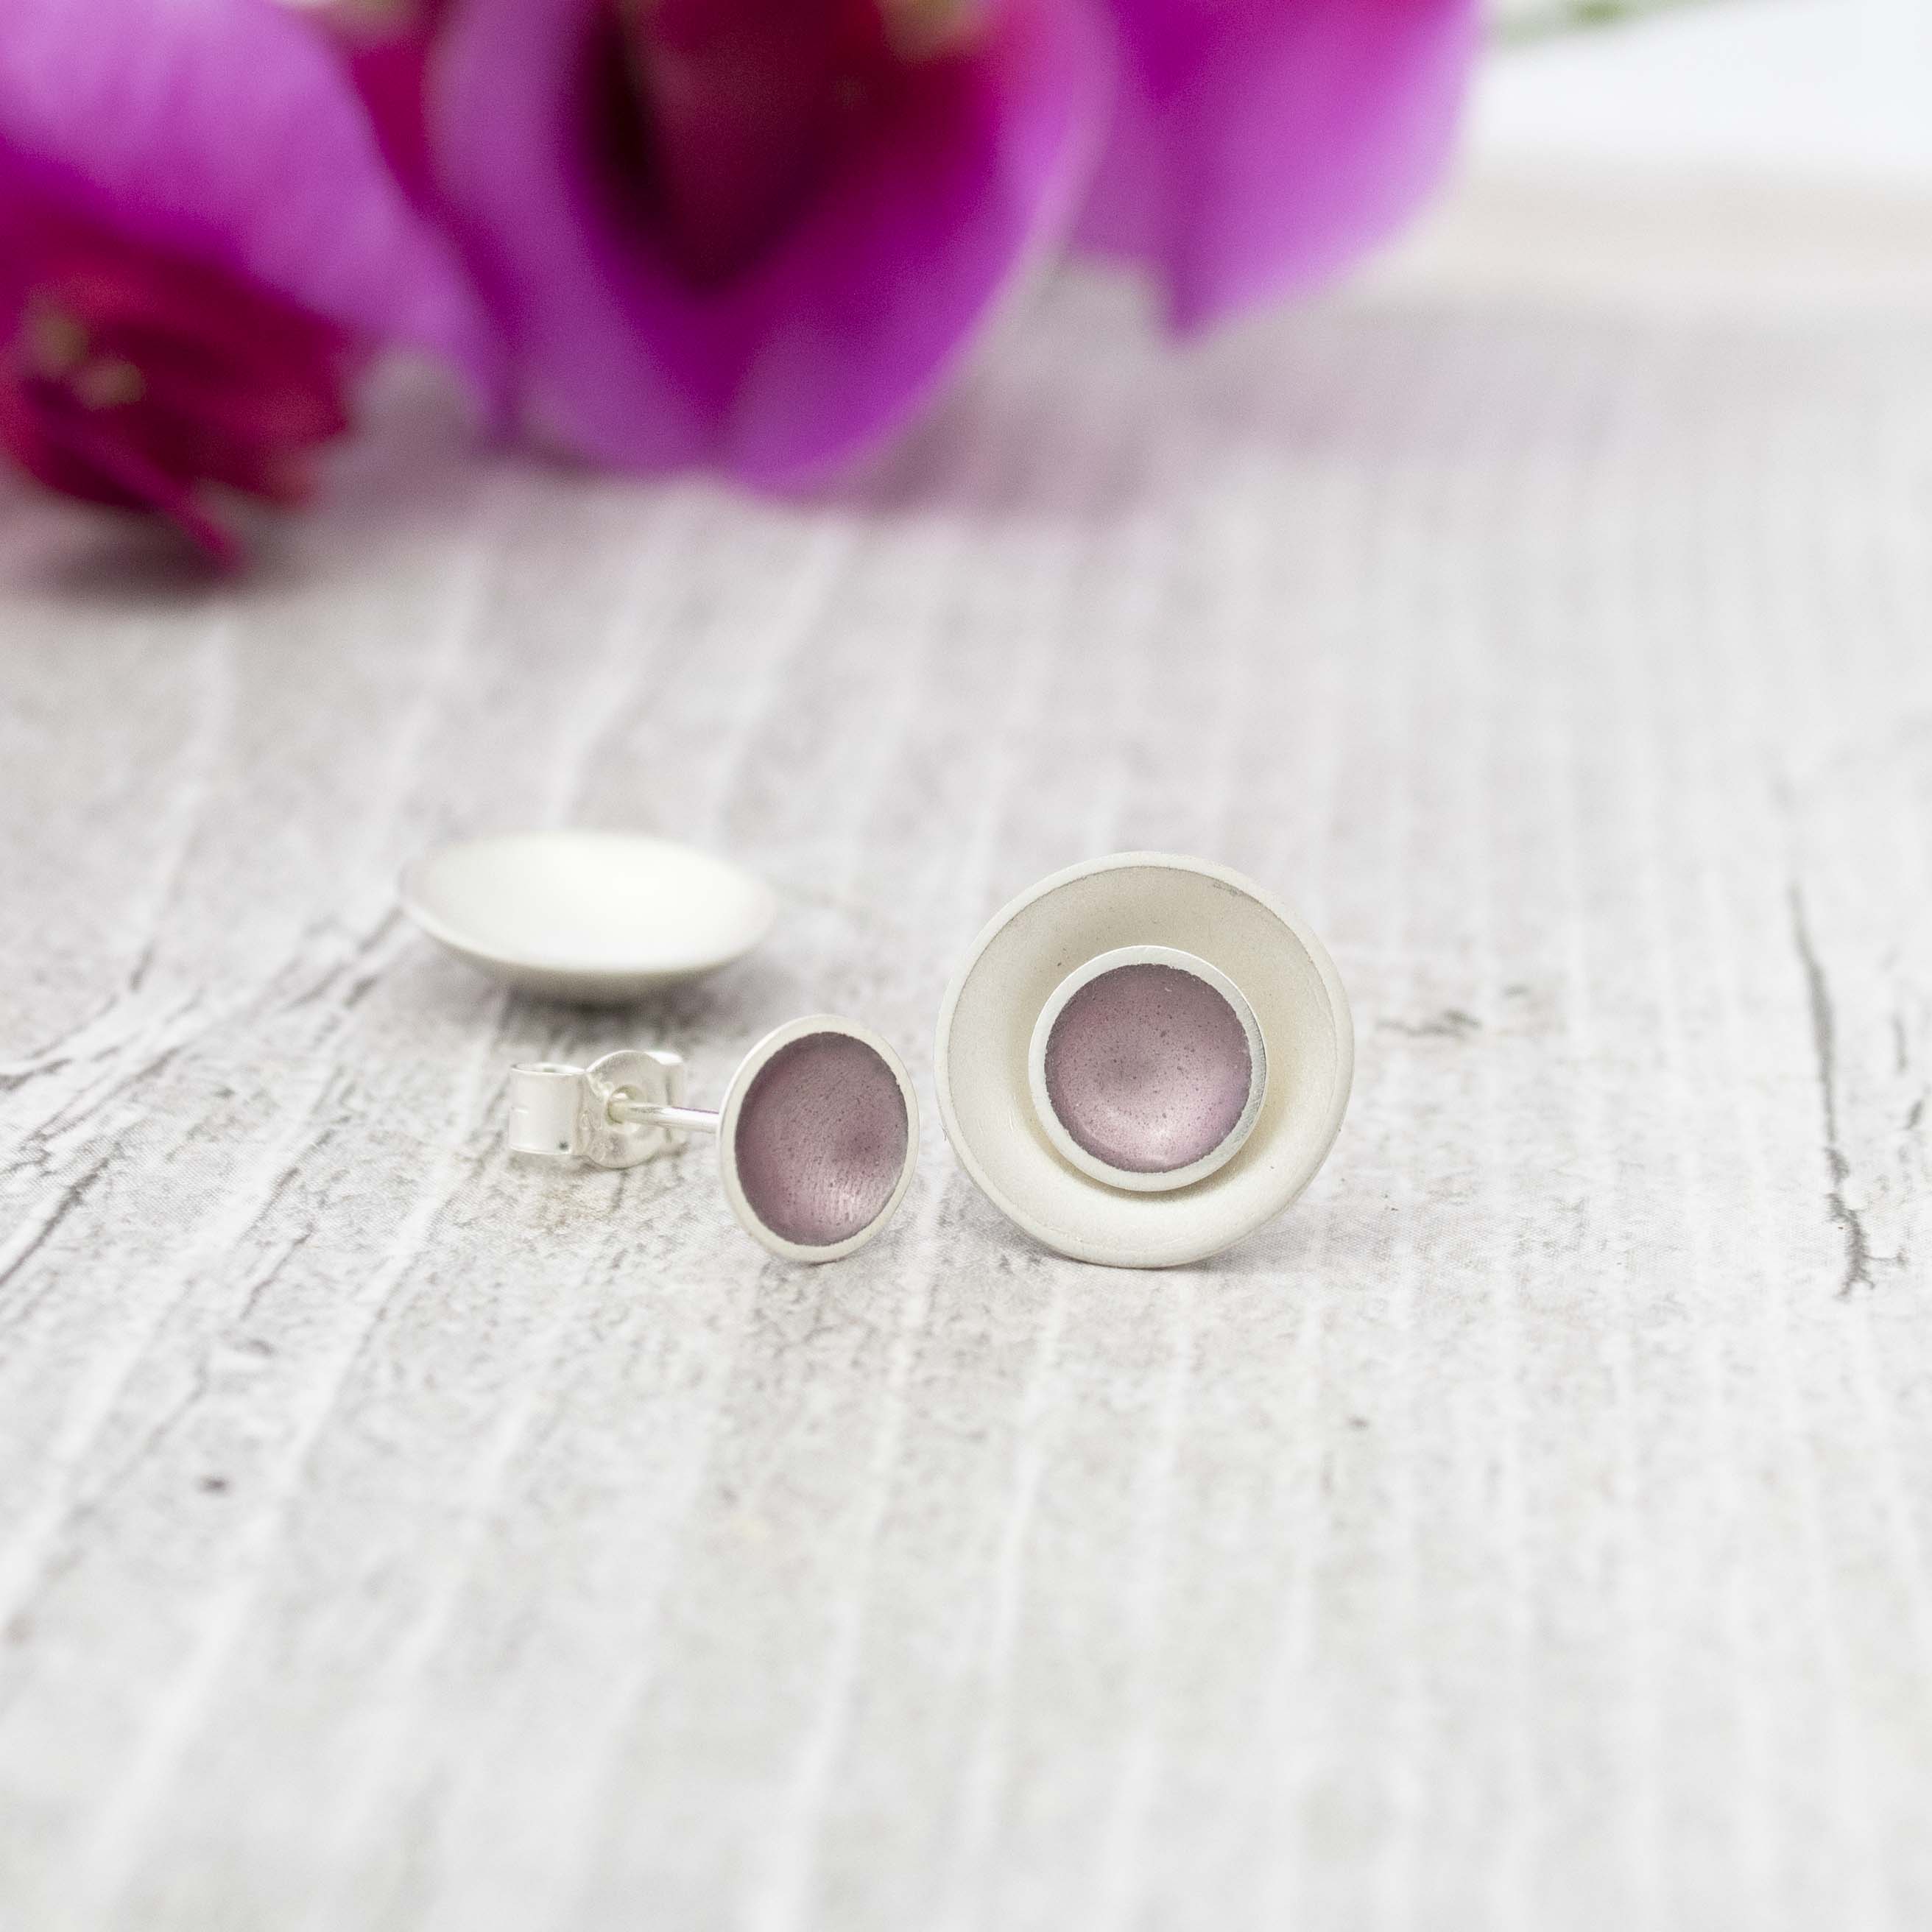 Halo Two-in-One Silver and Enamel Stud Earrings - Large